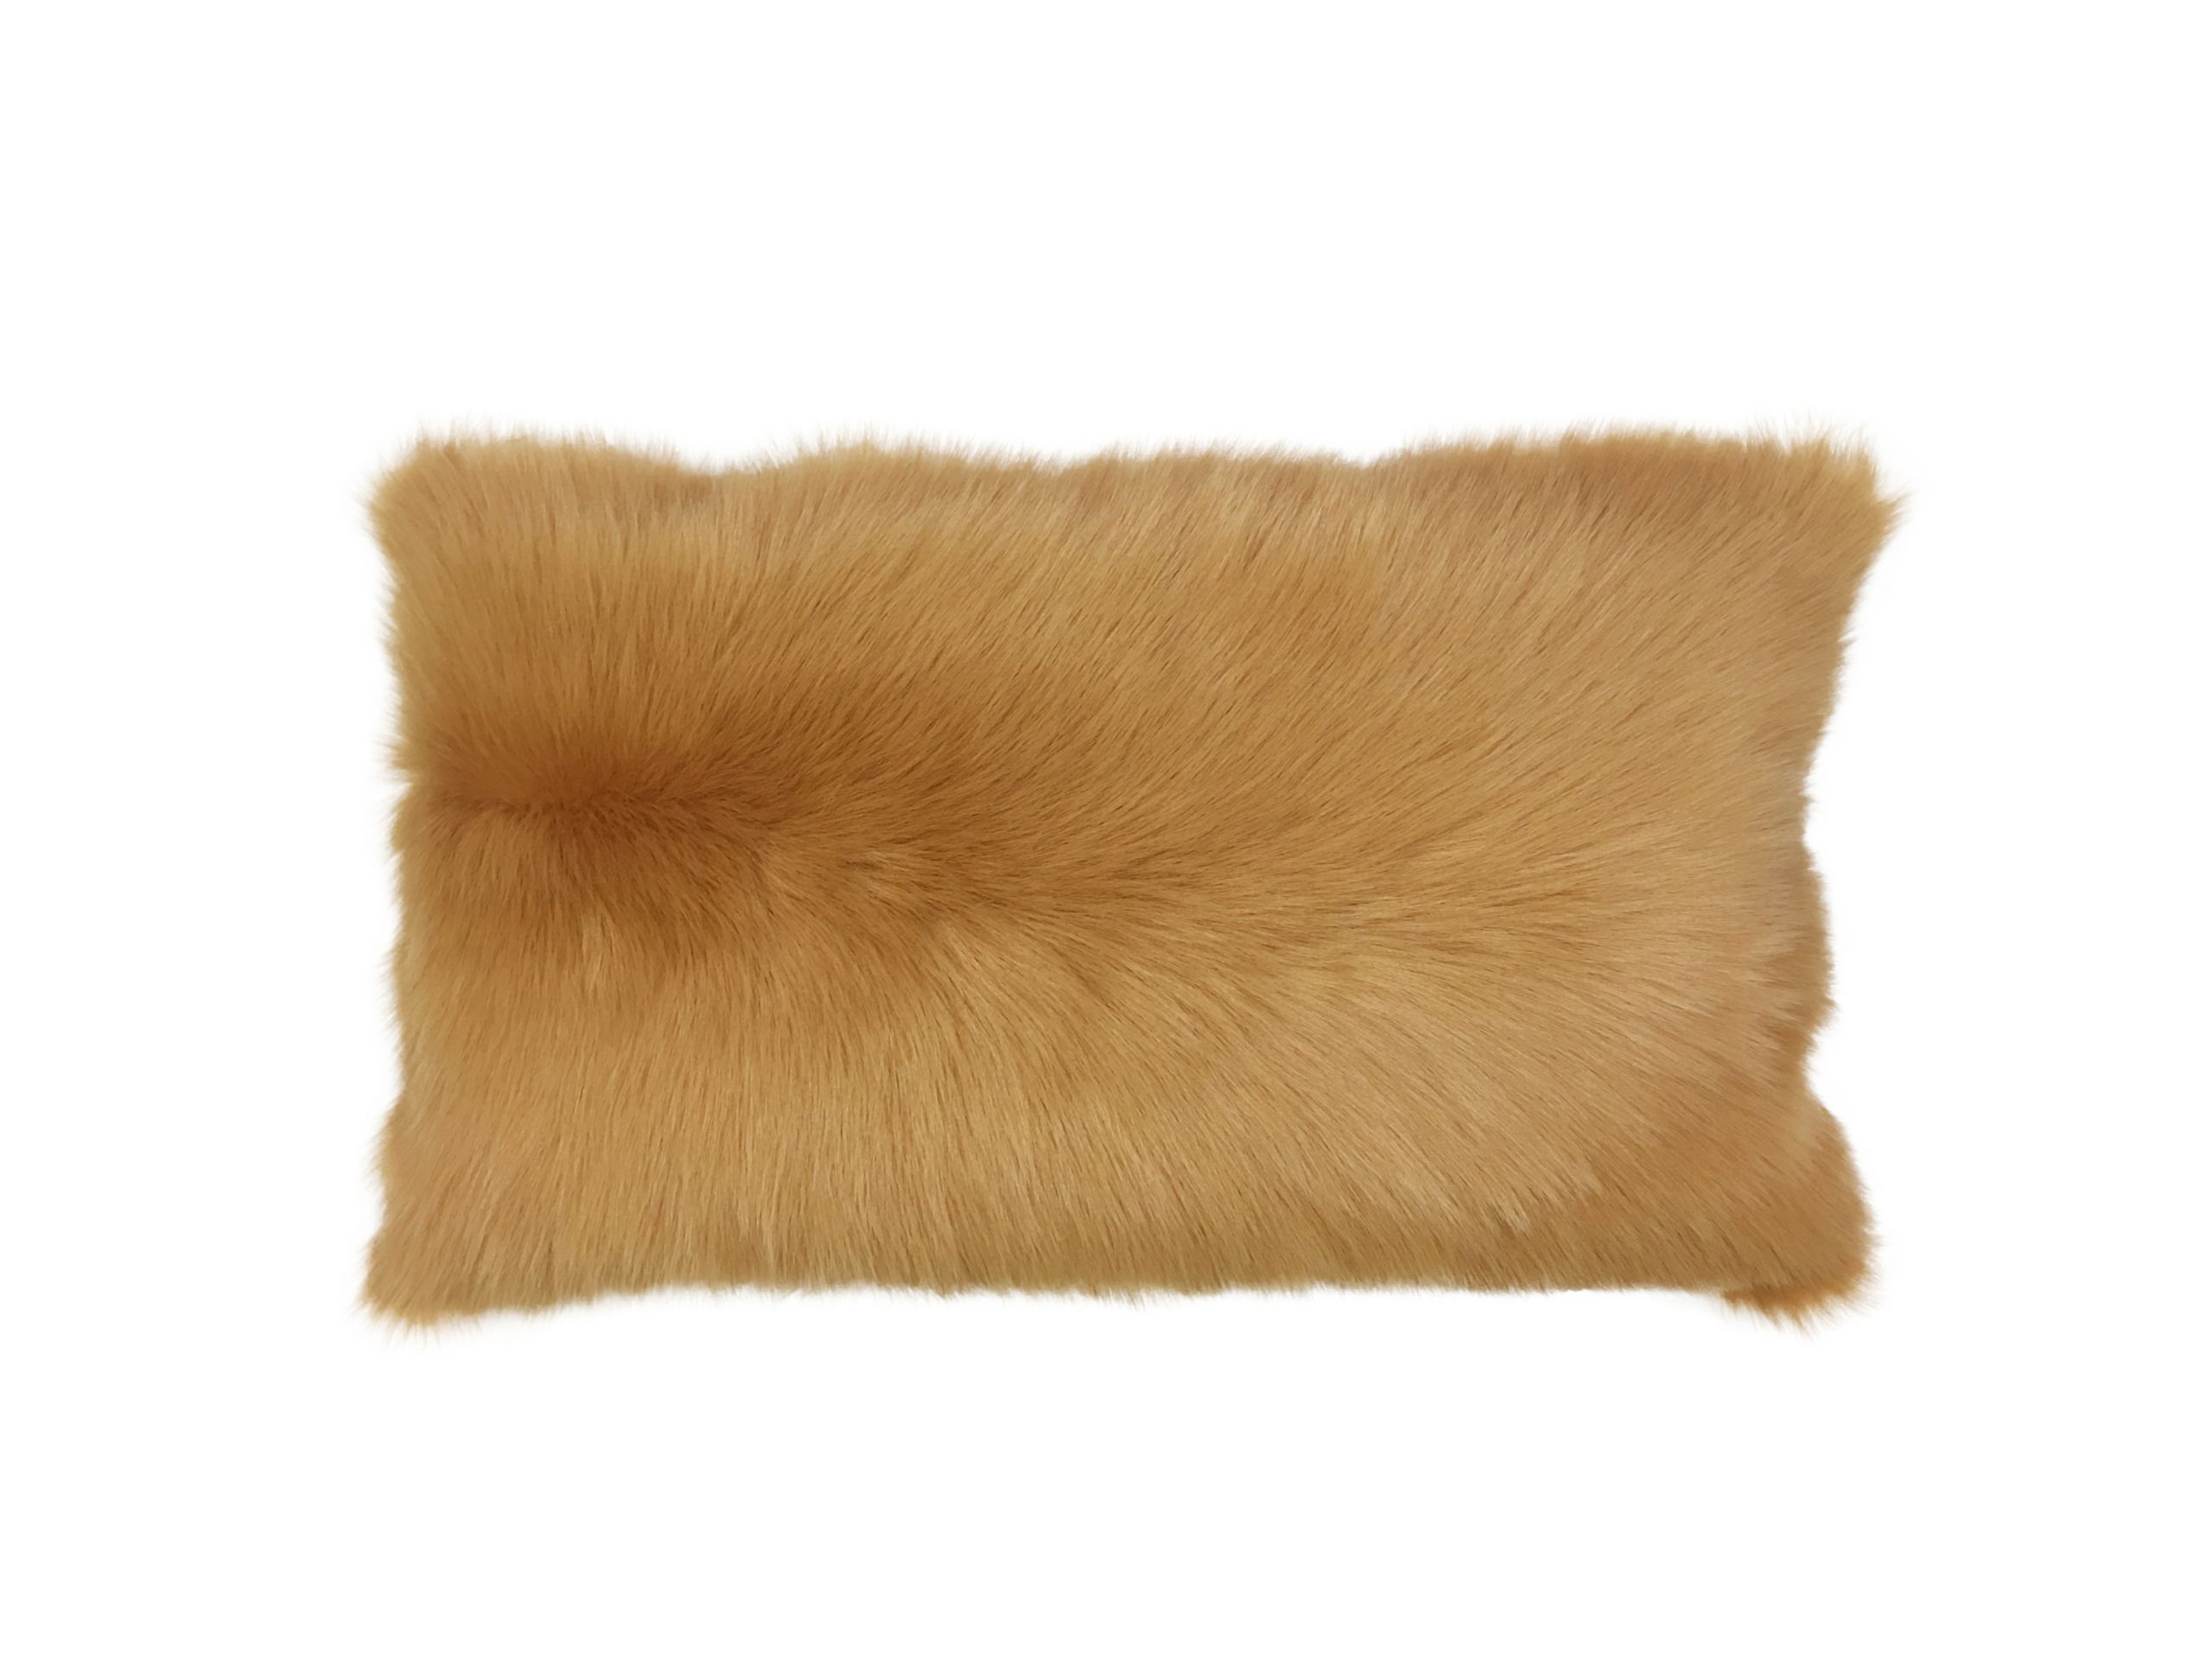 Shearling Pillow-Biscotte-30x50cm-SPBISS2643050 - ANVOGG FEEL SHEARLING | ANVOGG